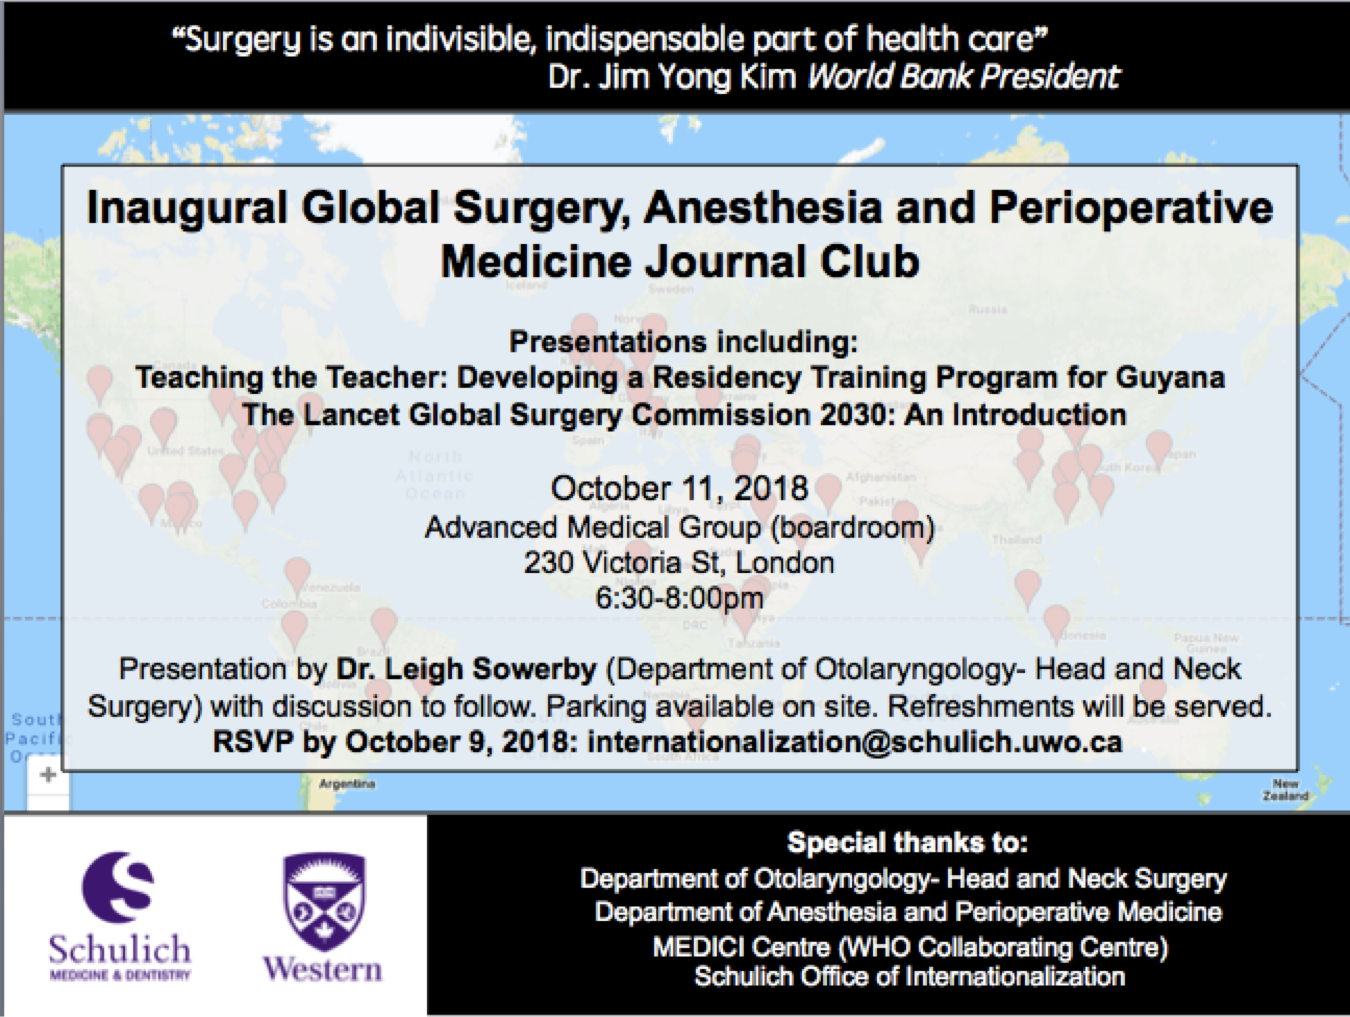 Inaugural Global Surgery, Anesthesia and Perioperative Medicine Journal Club